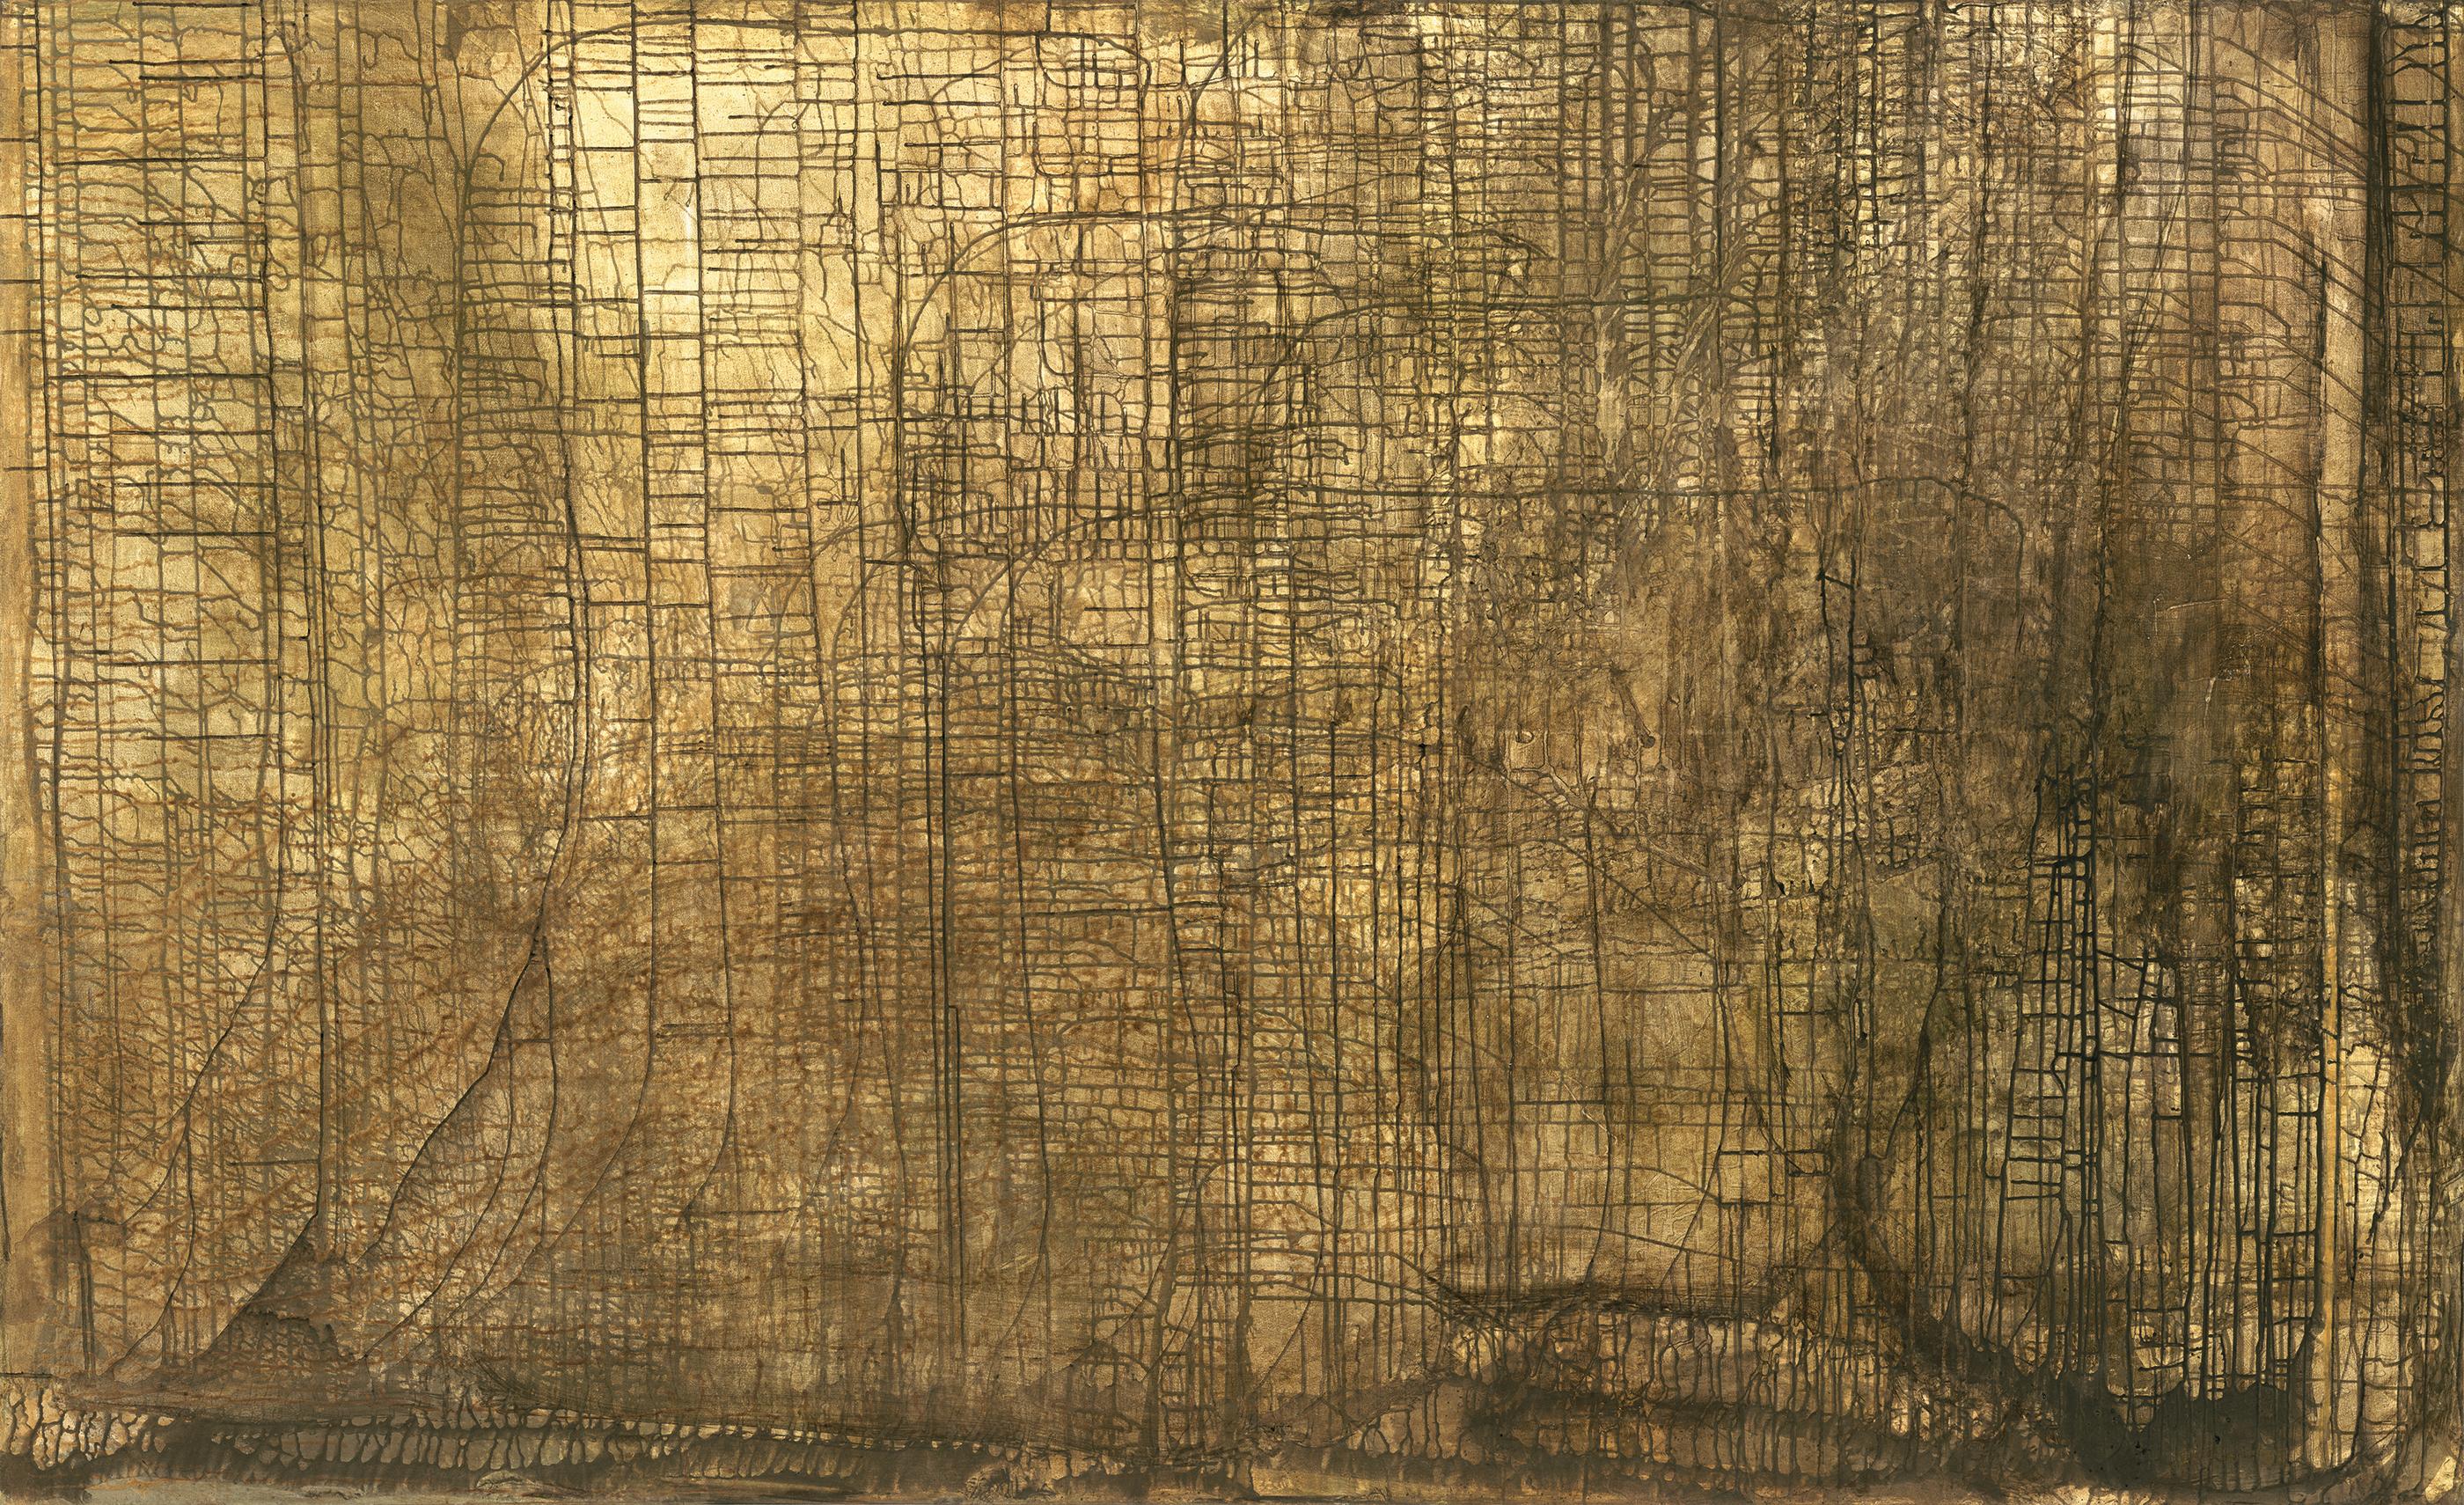 Zion 2 is a large scale new abstract canvas painting by Debra Ferrari with layers of soft beiges, browns, creamy yellows and a hint of deep forest green buried in the many multiple layers of acrylic paints. Inspired by the cliff formations and